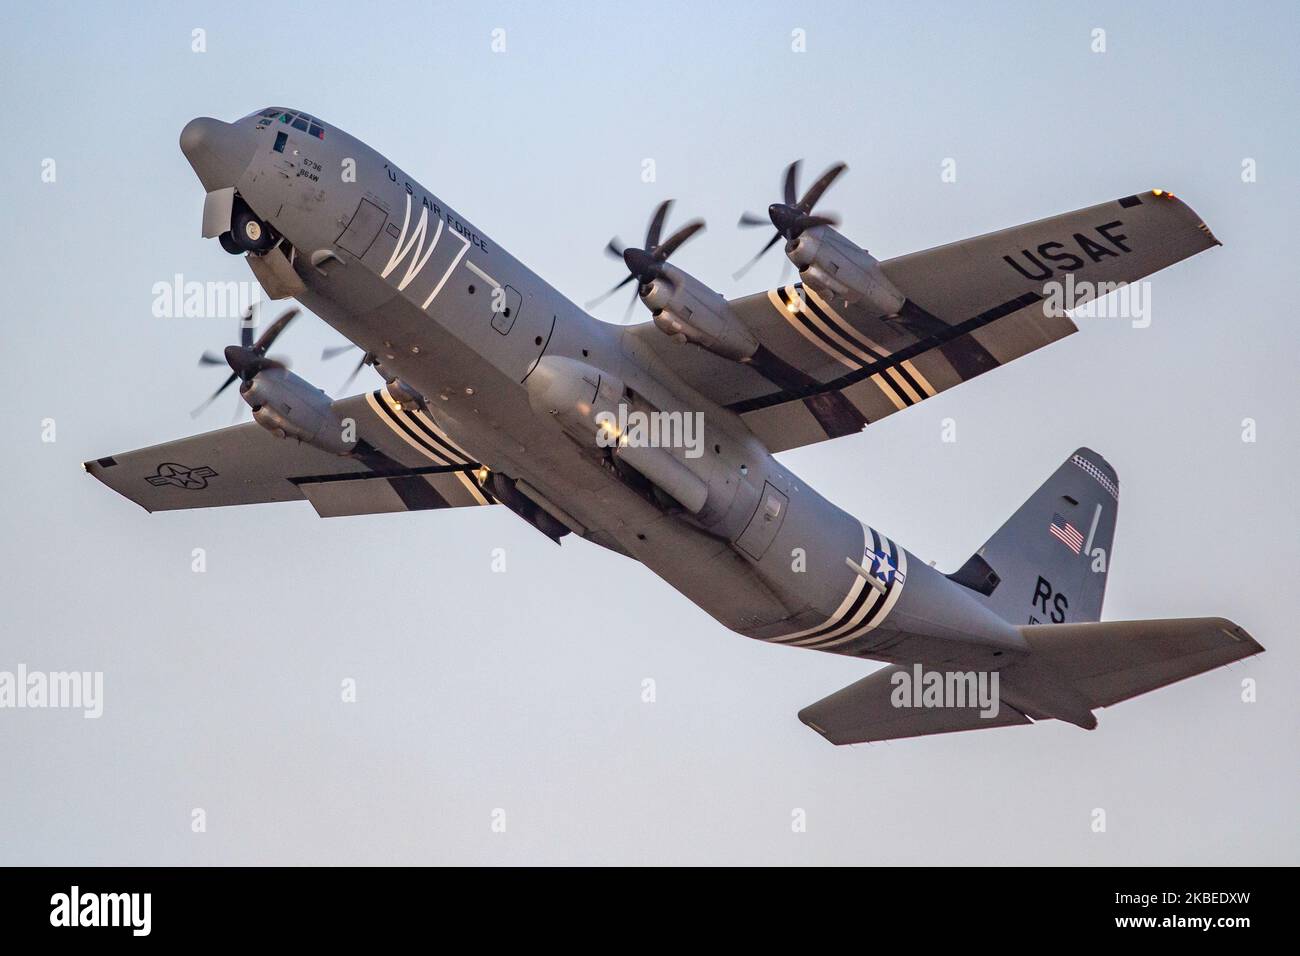 An Iconic C-130 military transport turboprop aircraft during the takeoff phase. The American plane, a Lockheed Martin C-130J-30 Super Hercules of the United Staes - US Air Force USAF is carrying special markings paint commemorating 75 years D-Day celebrations. The W7 code used in June 1944 for the 37 Troop Carrier Squadron, nowadays Airlift wings, that participated in DDay landings. The airplane participated in Athens Flying Week Air Show at Tanagra LGTG Air Base in Greece. Tanagra, Greece - September 22, 2019 (Photo by Nicolas Economou/NurPhoto) Stock Photo